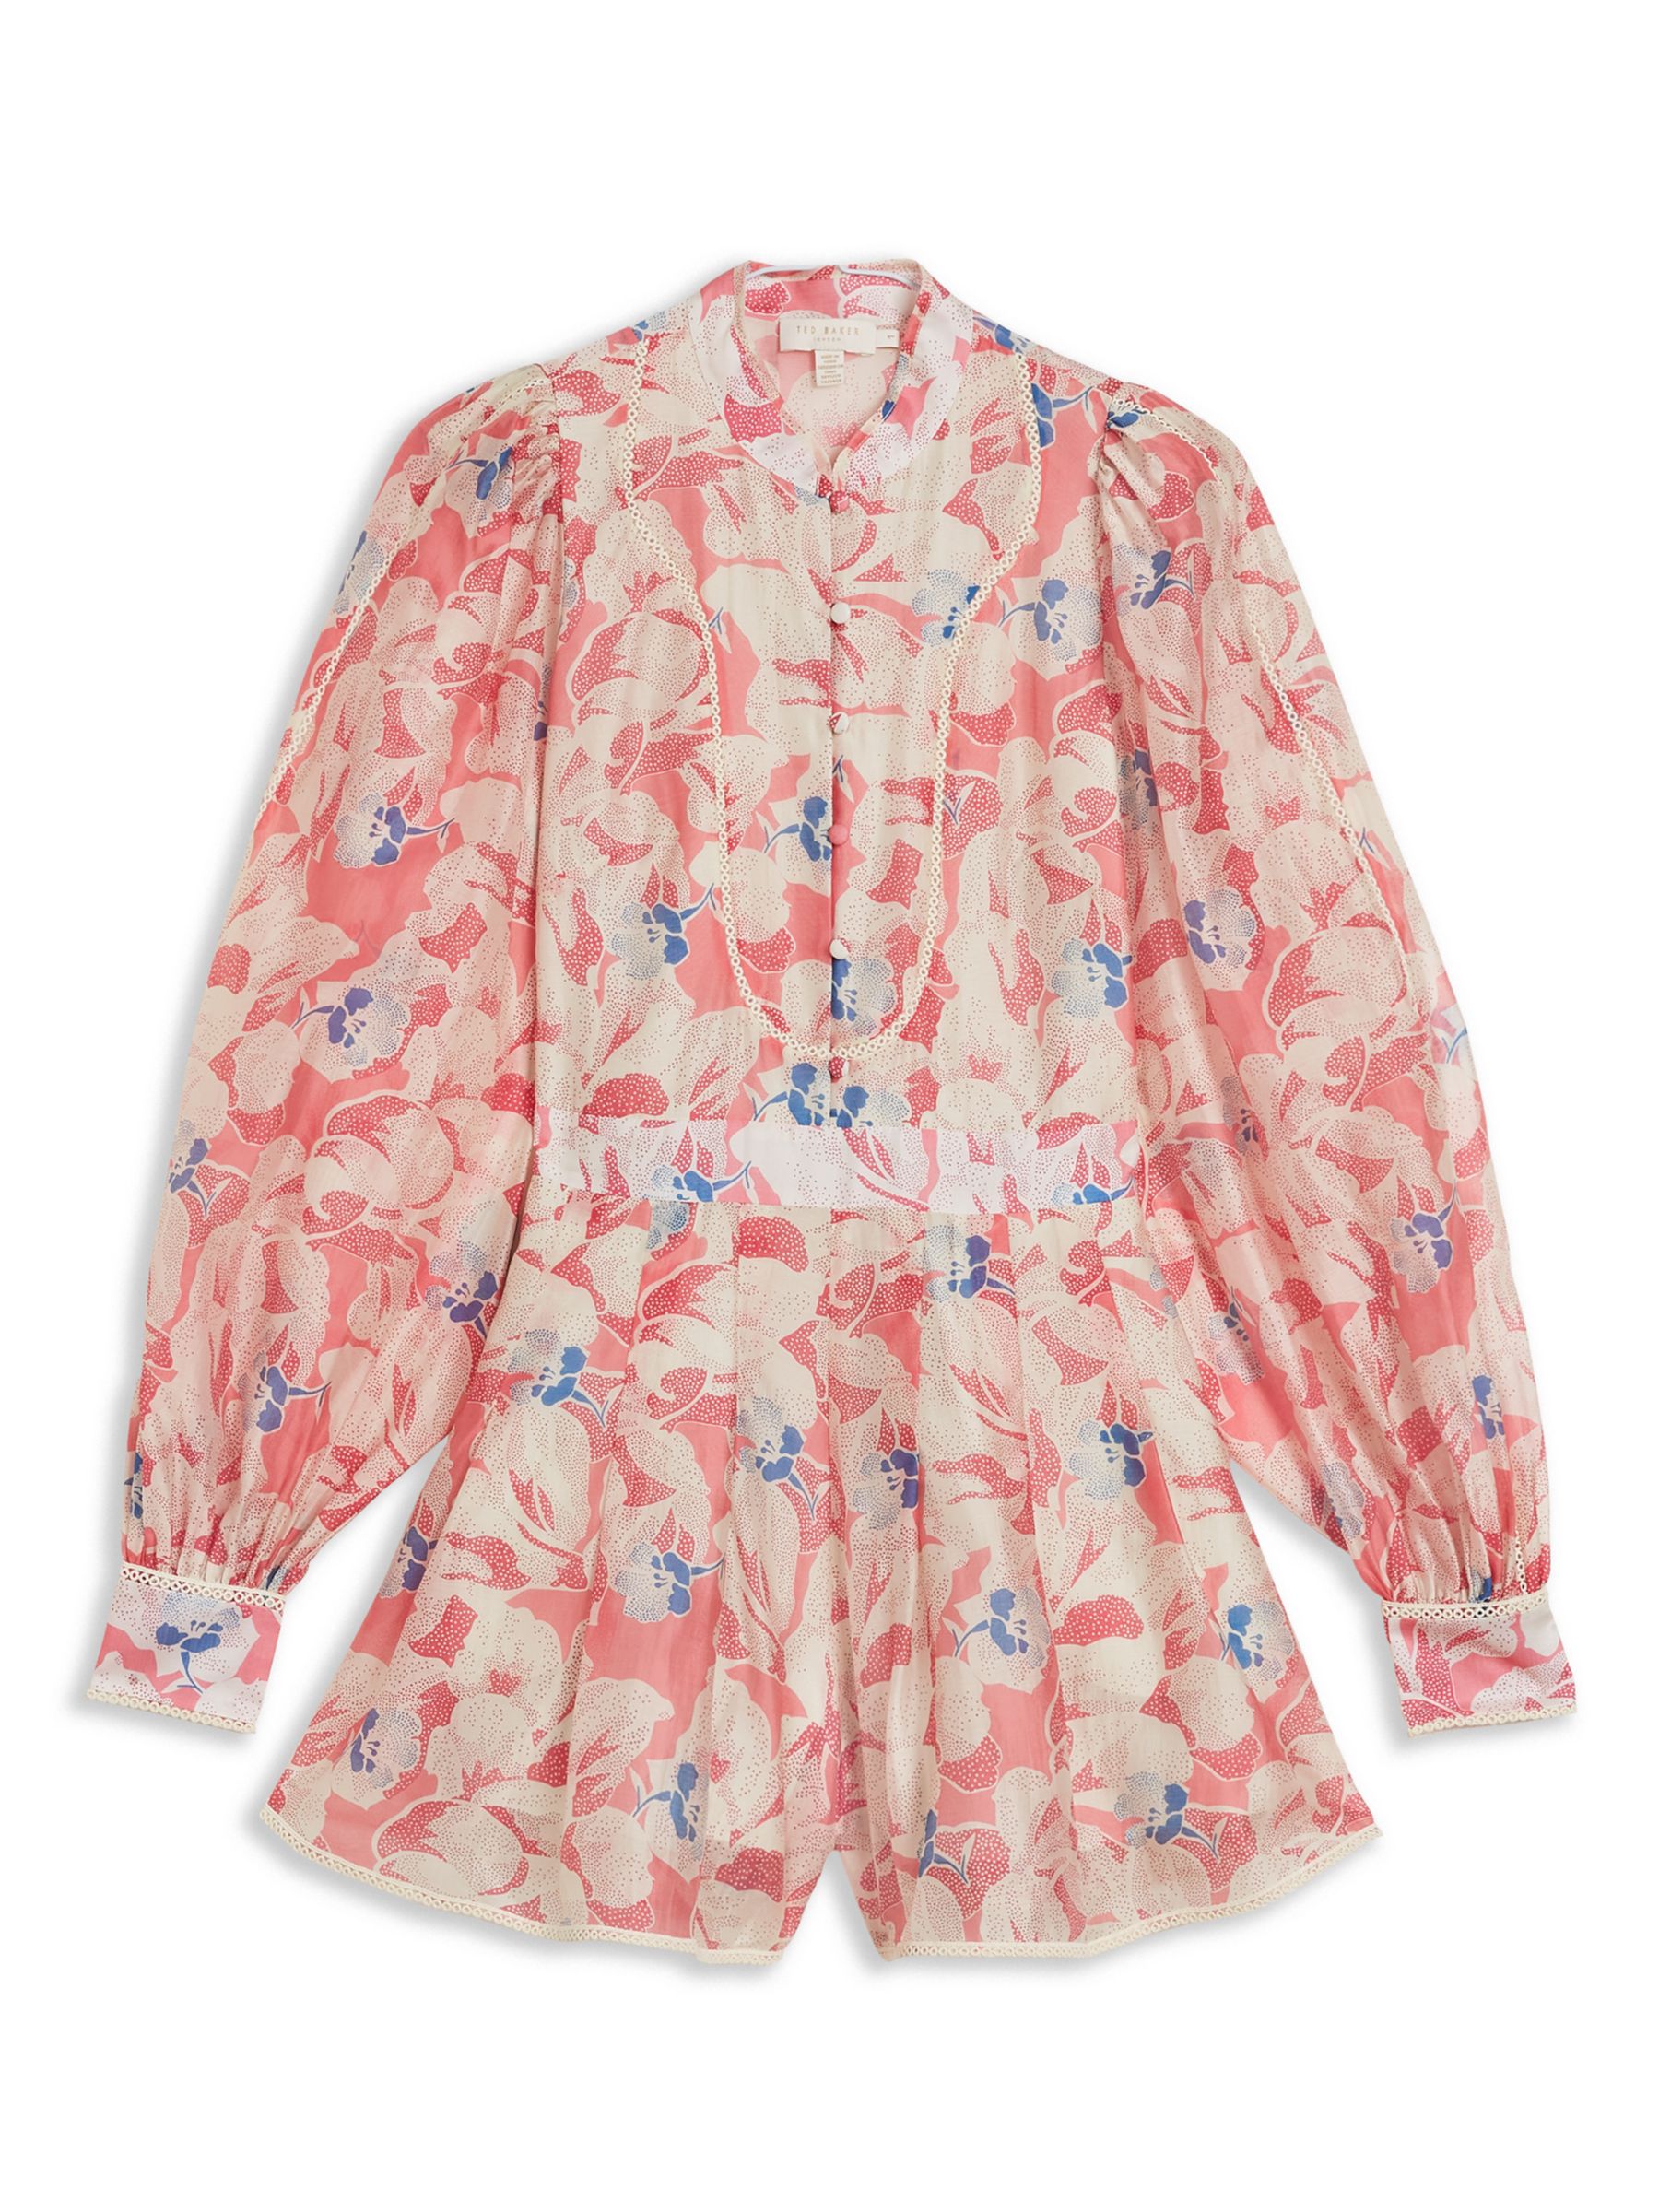 Ted Baker Lele Floral Balloon Sleeve Playsuit, Mid Pink at John Lewis ...